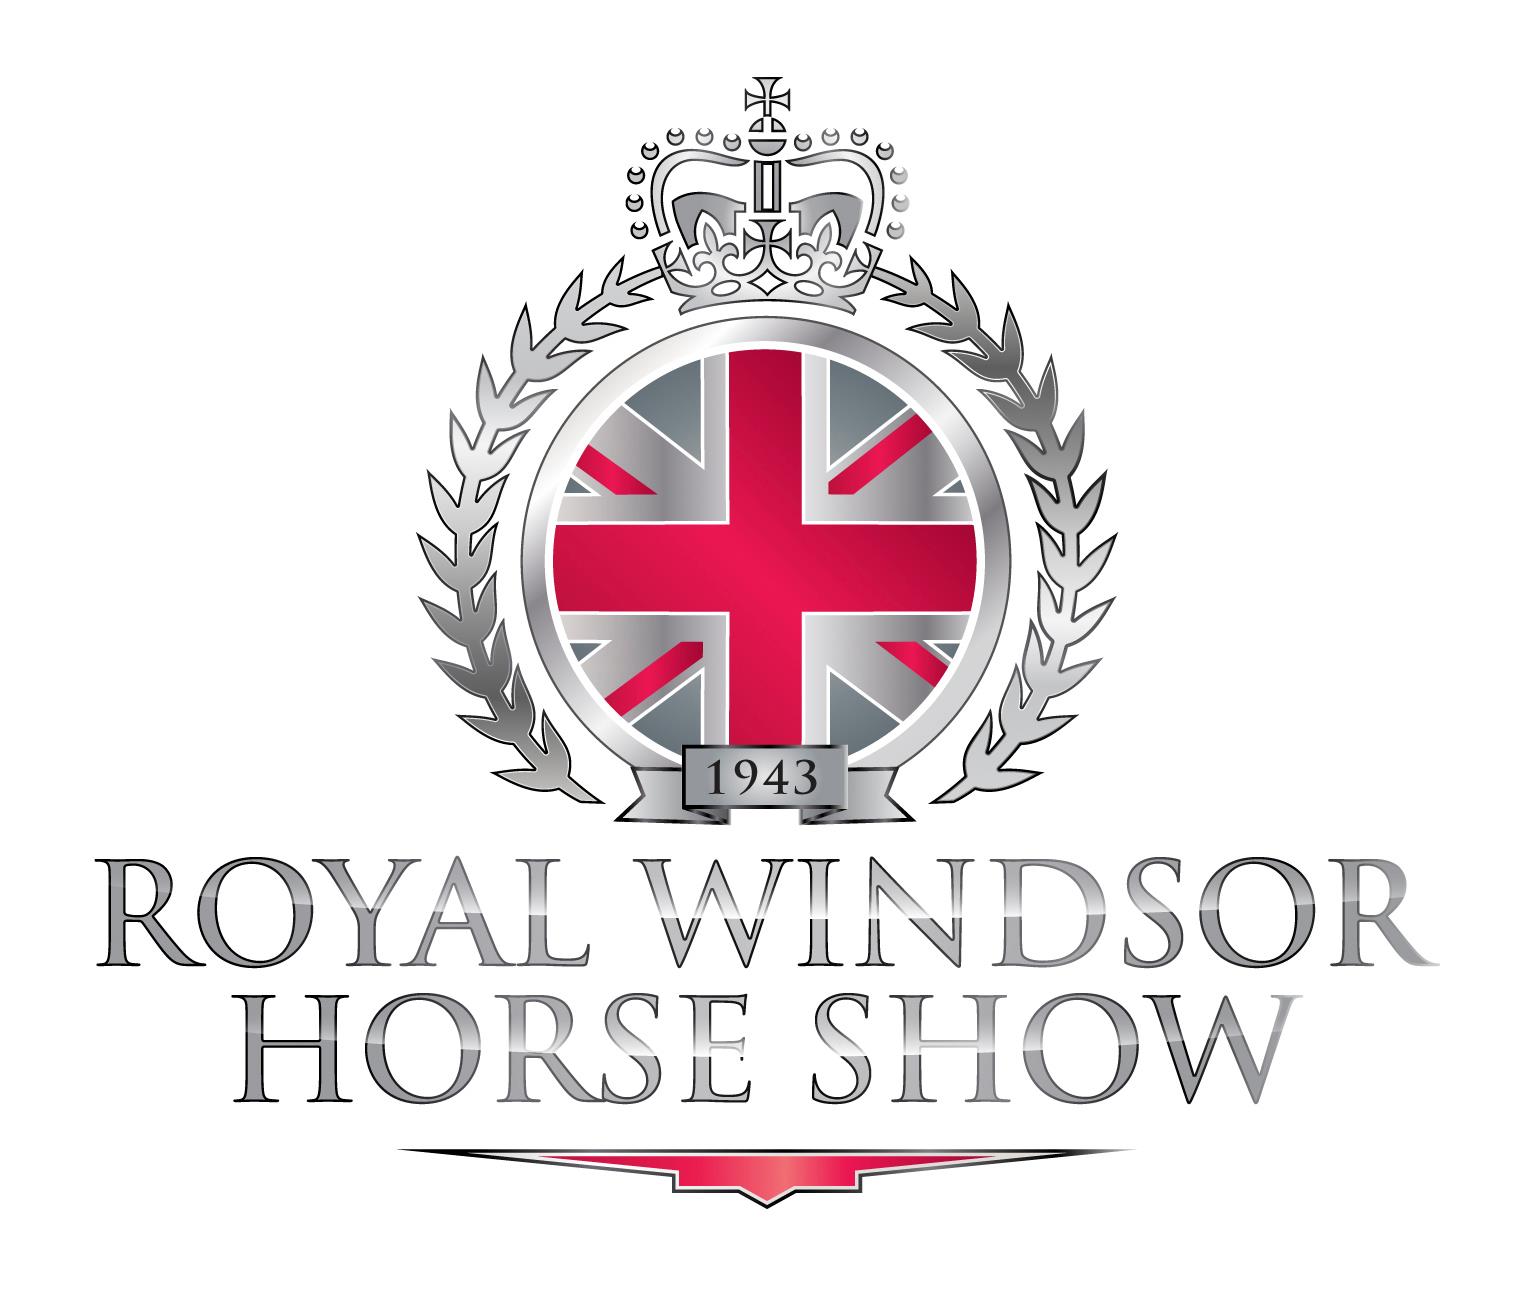 A new status for Royal Windsor Horse Show in 2017